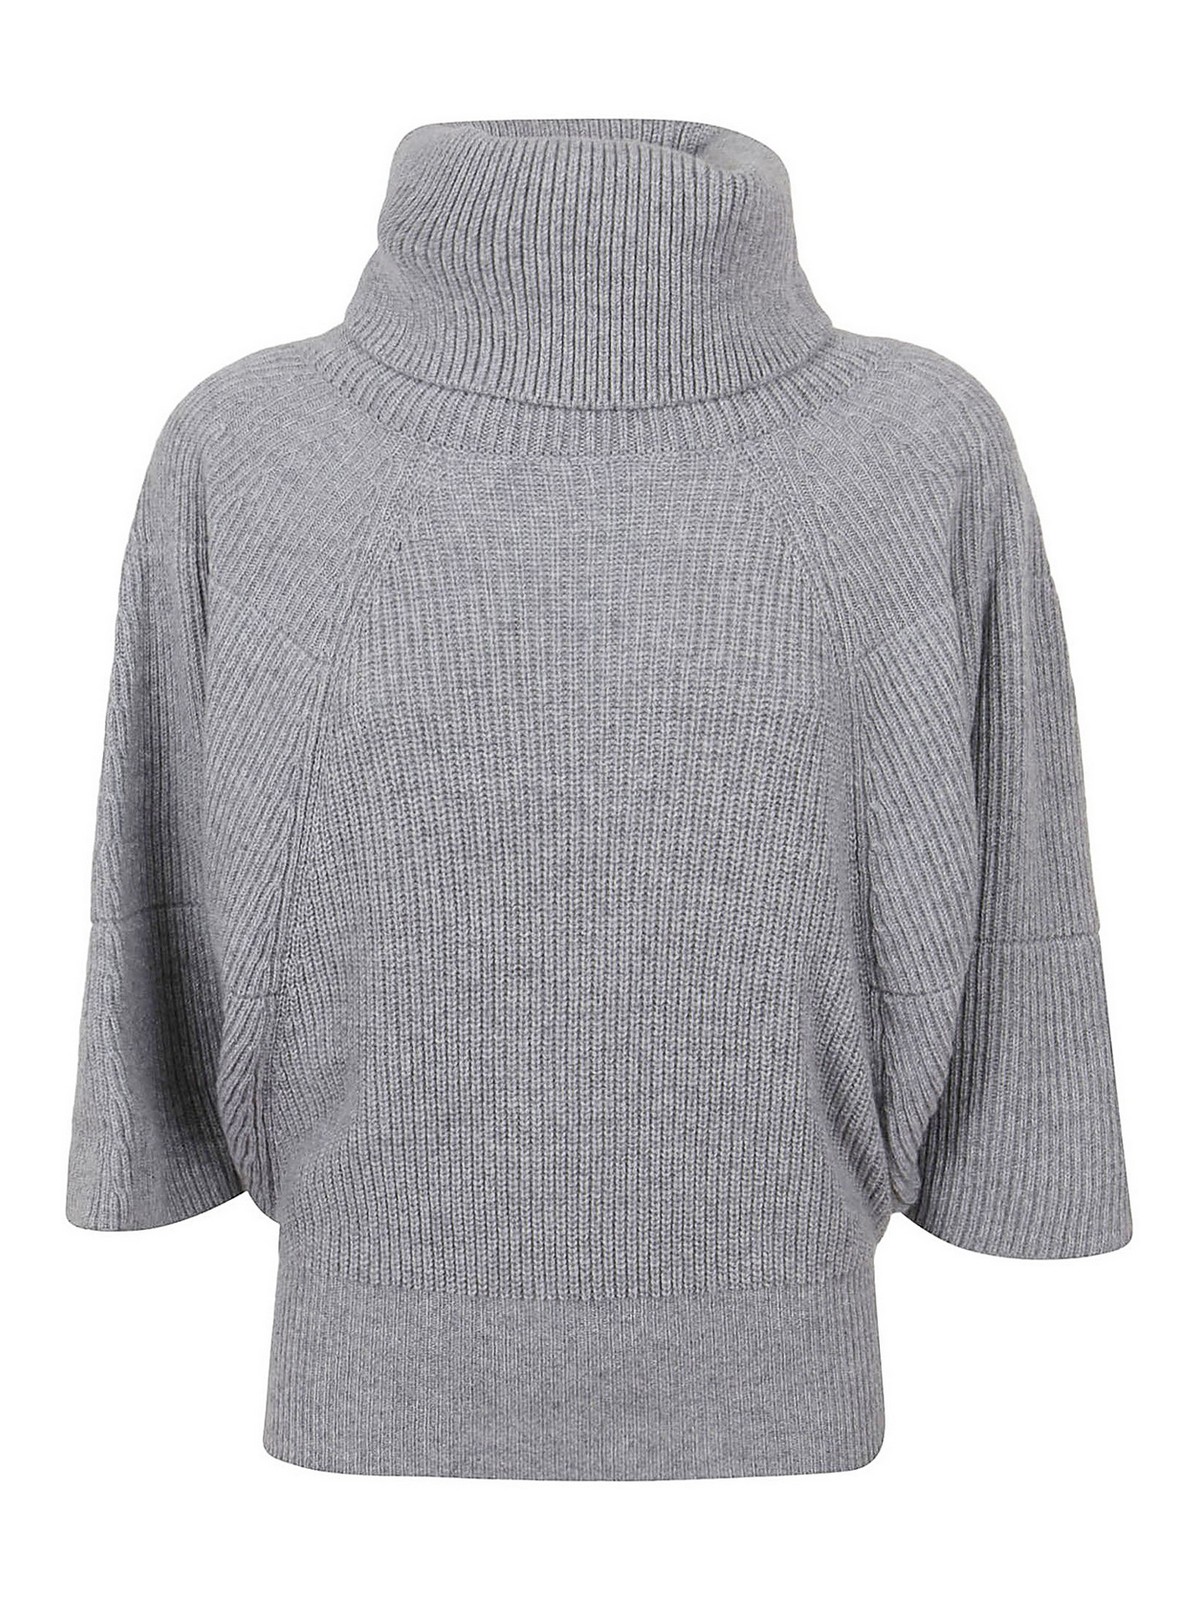 givenchy turtleneck sweater